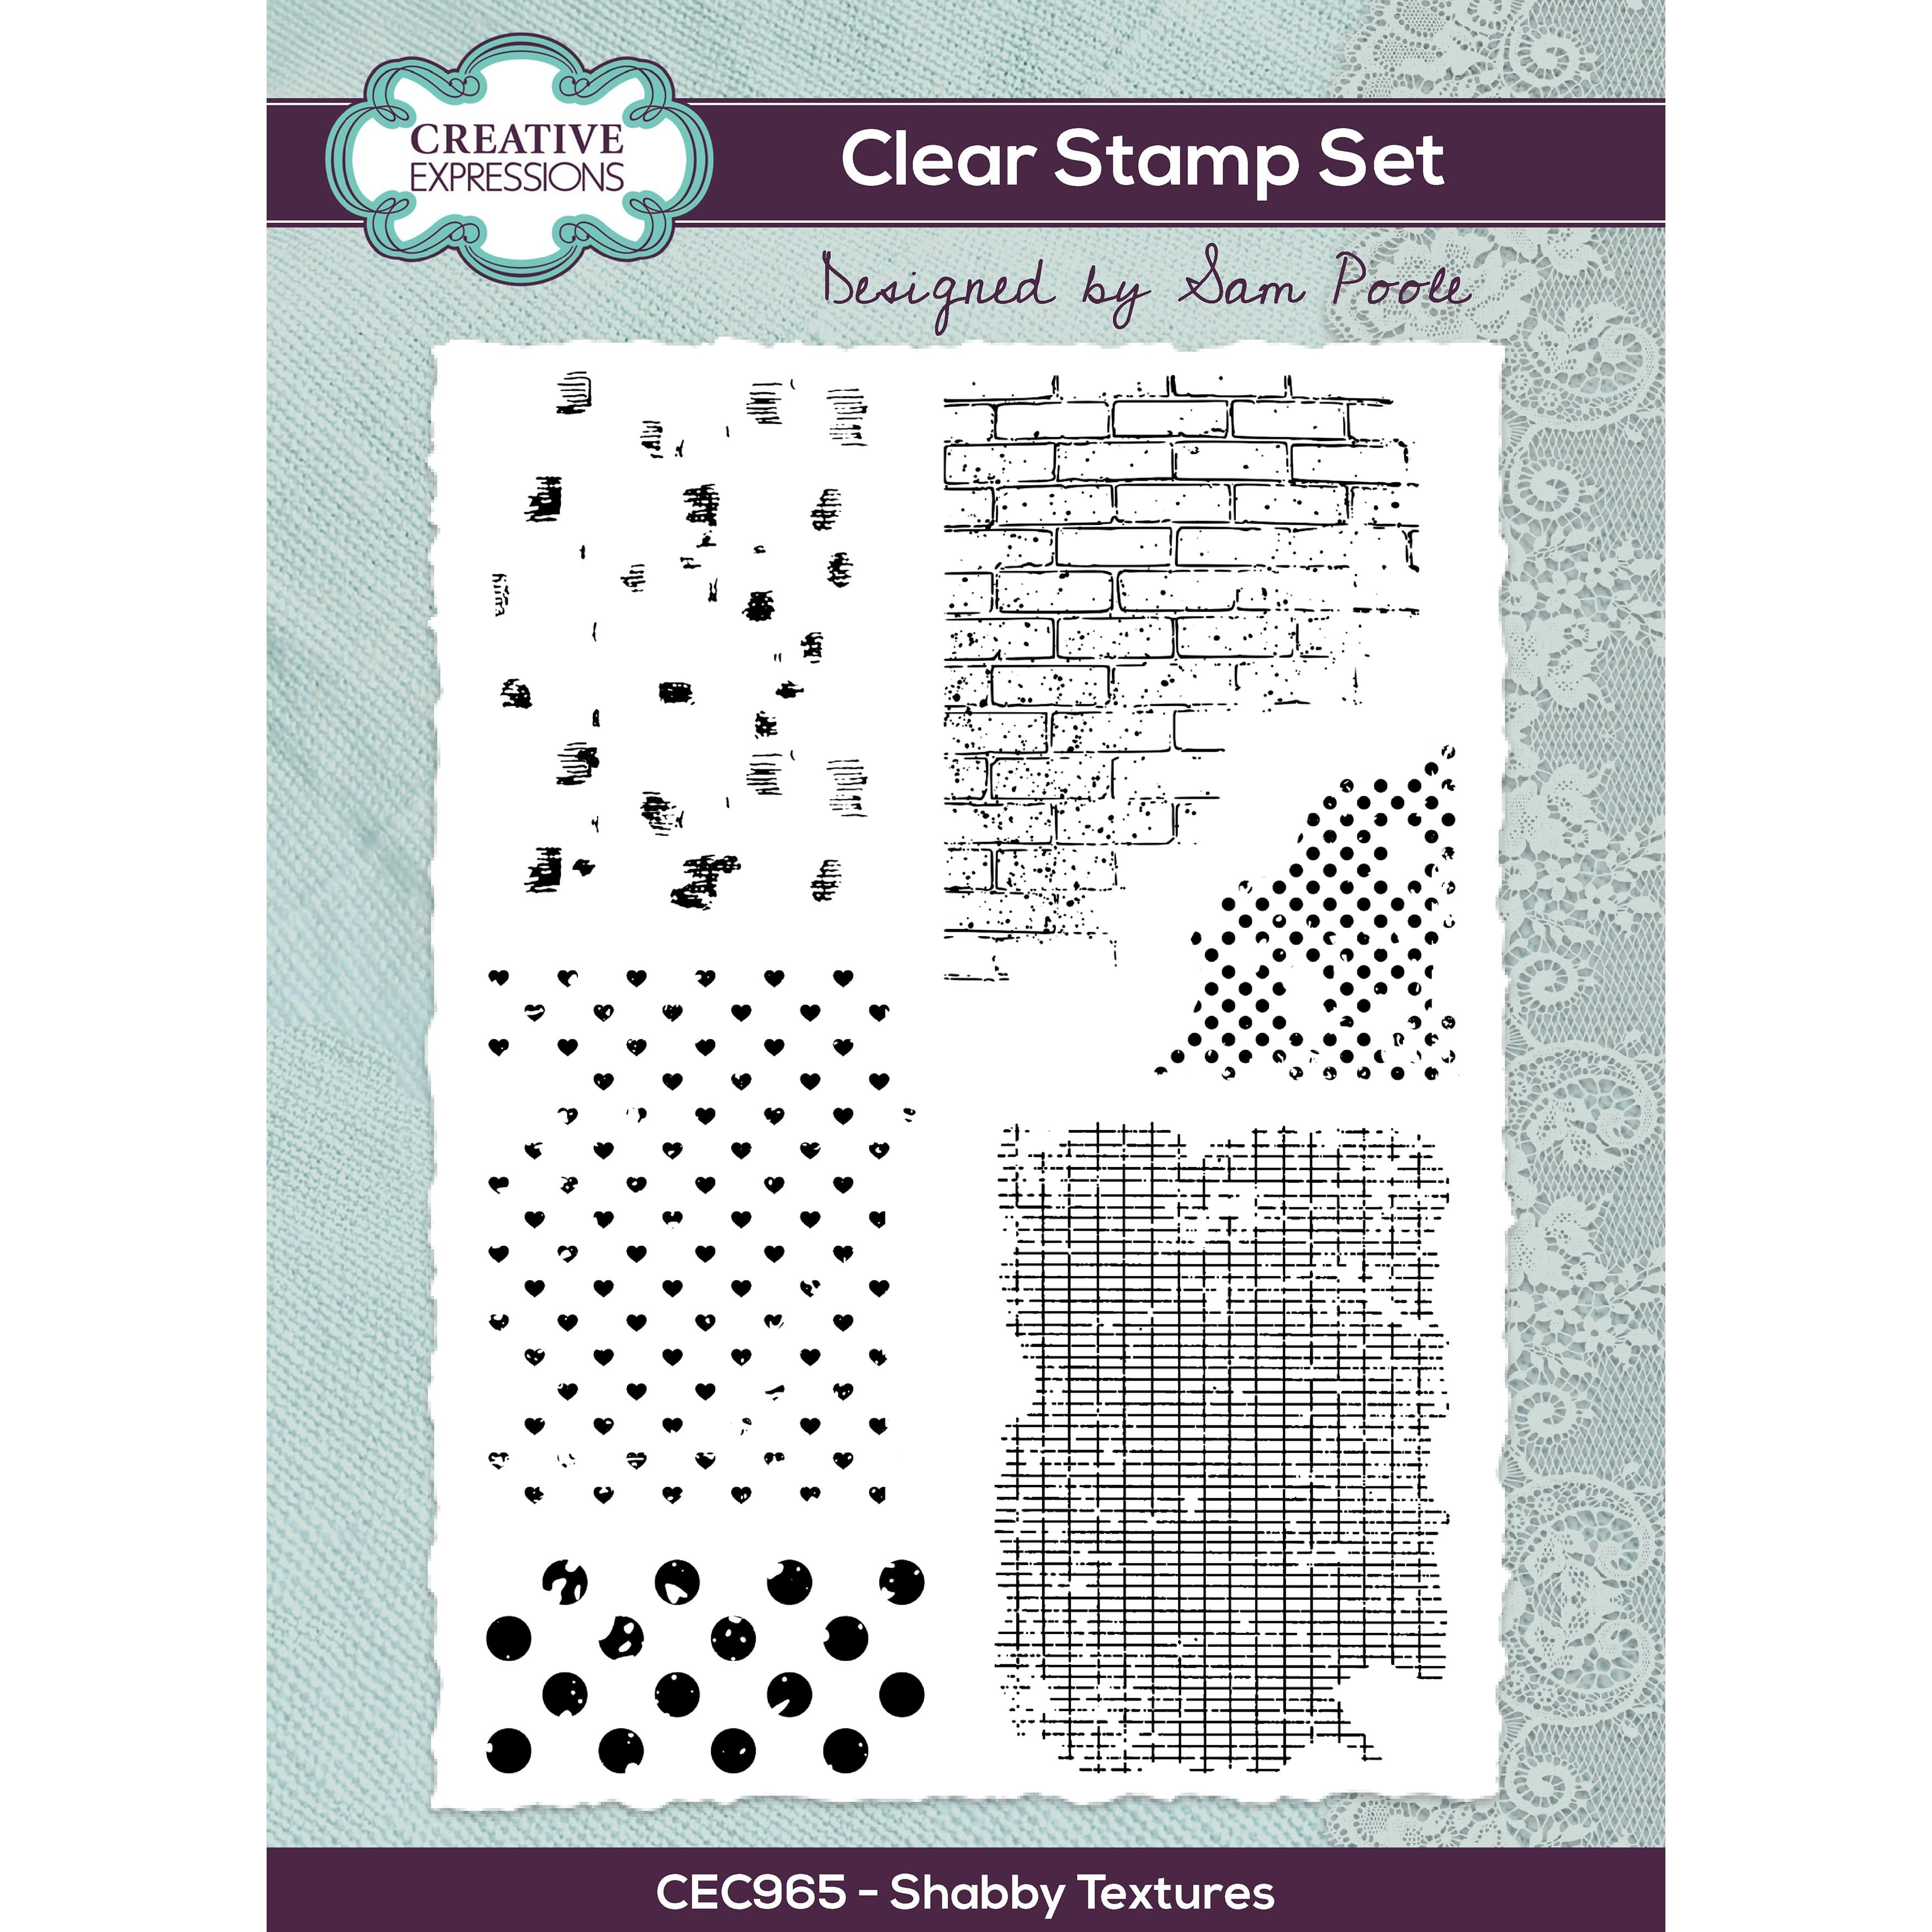 Creative Expressions by Sam Poole Shabby Textures Clear Stamp Set